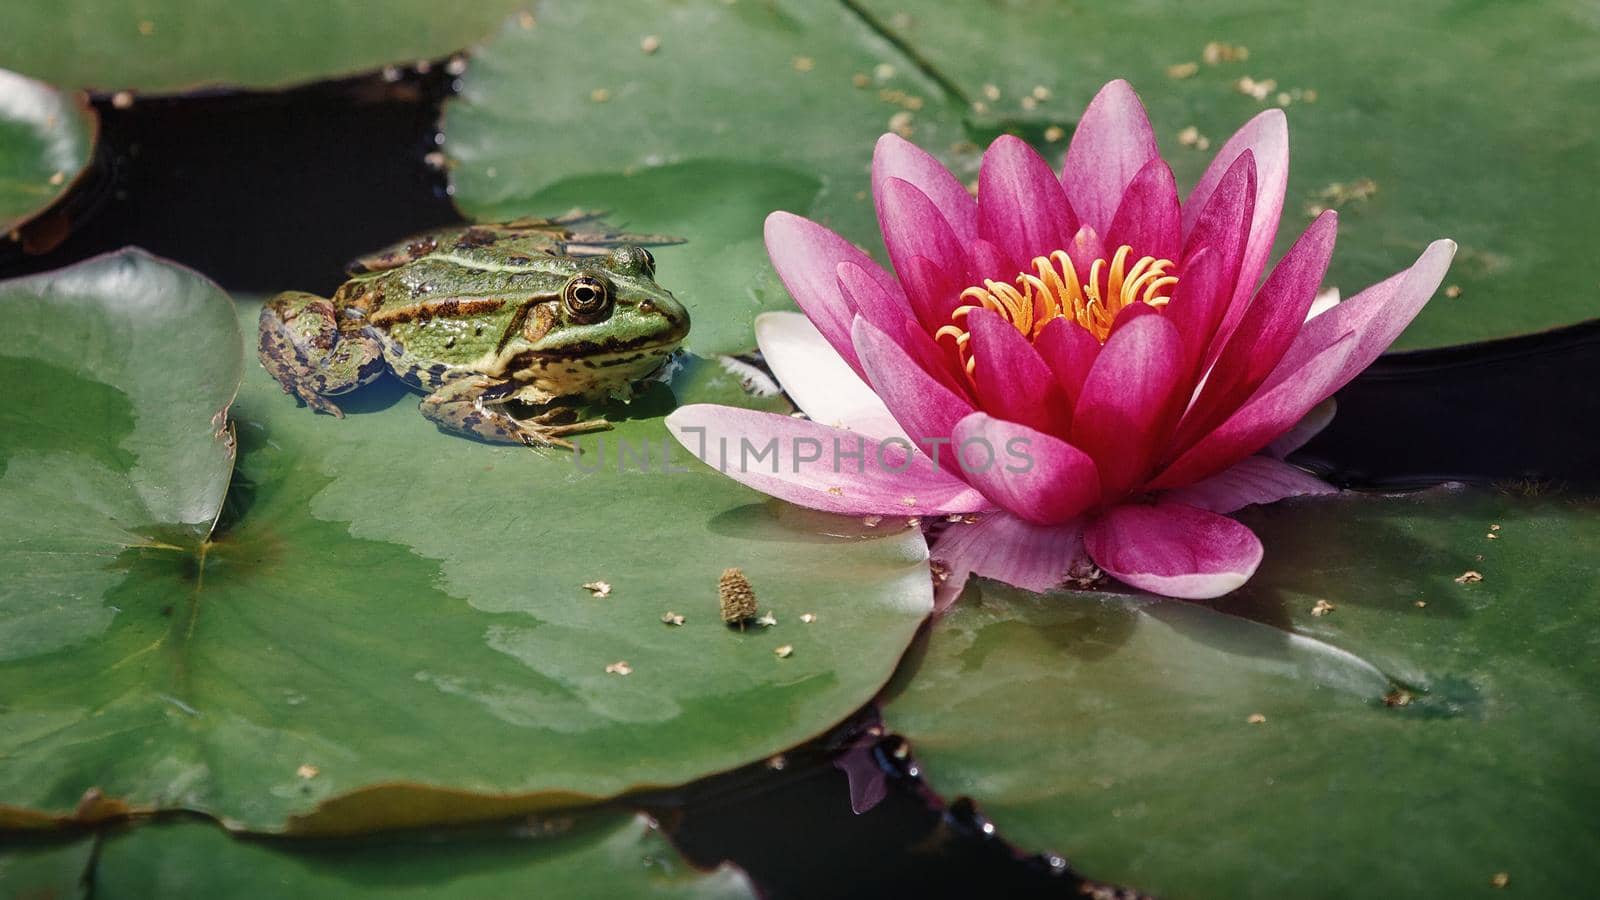 The green frog of pond is sitting on a green leaf, next to a pink big lily flower